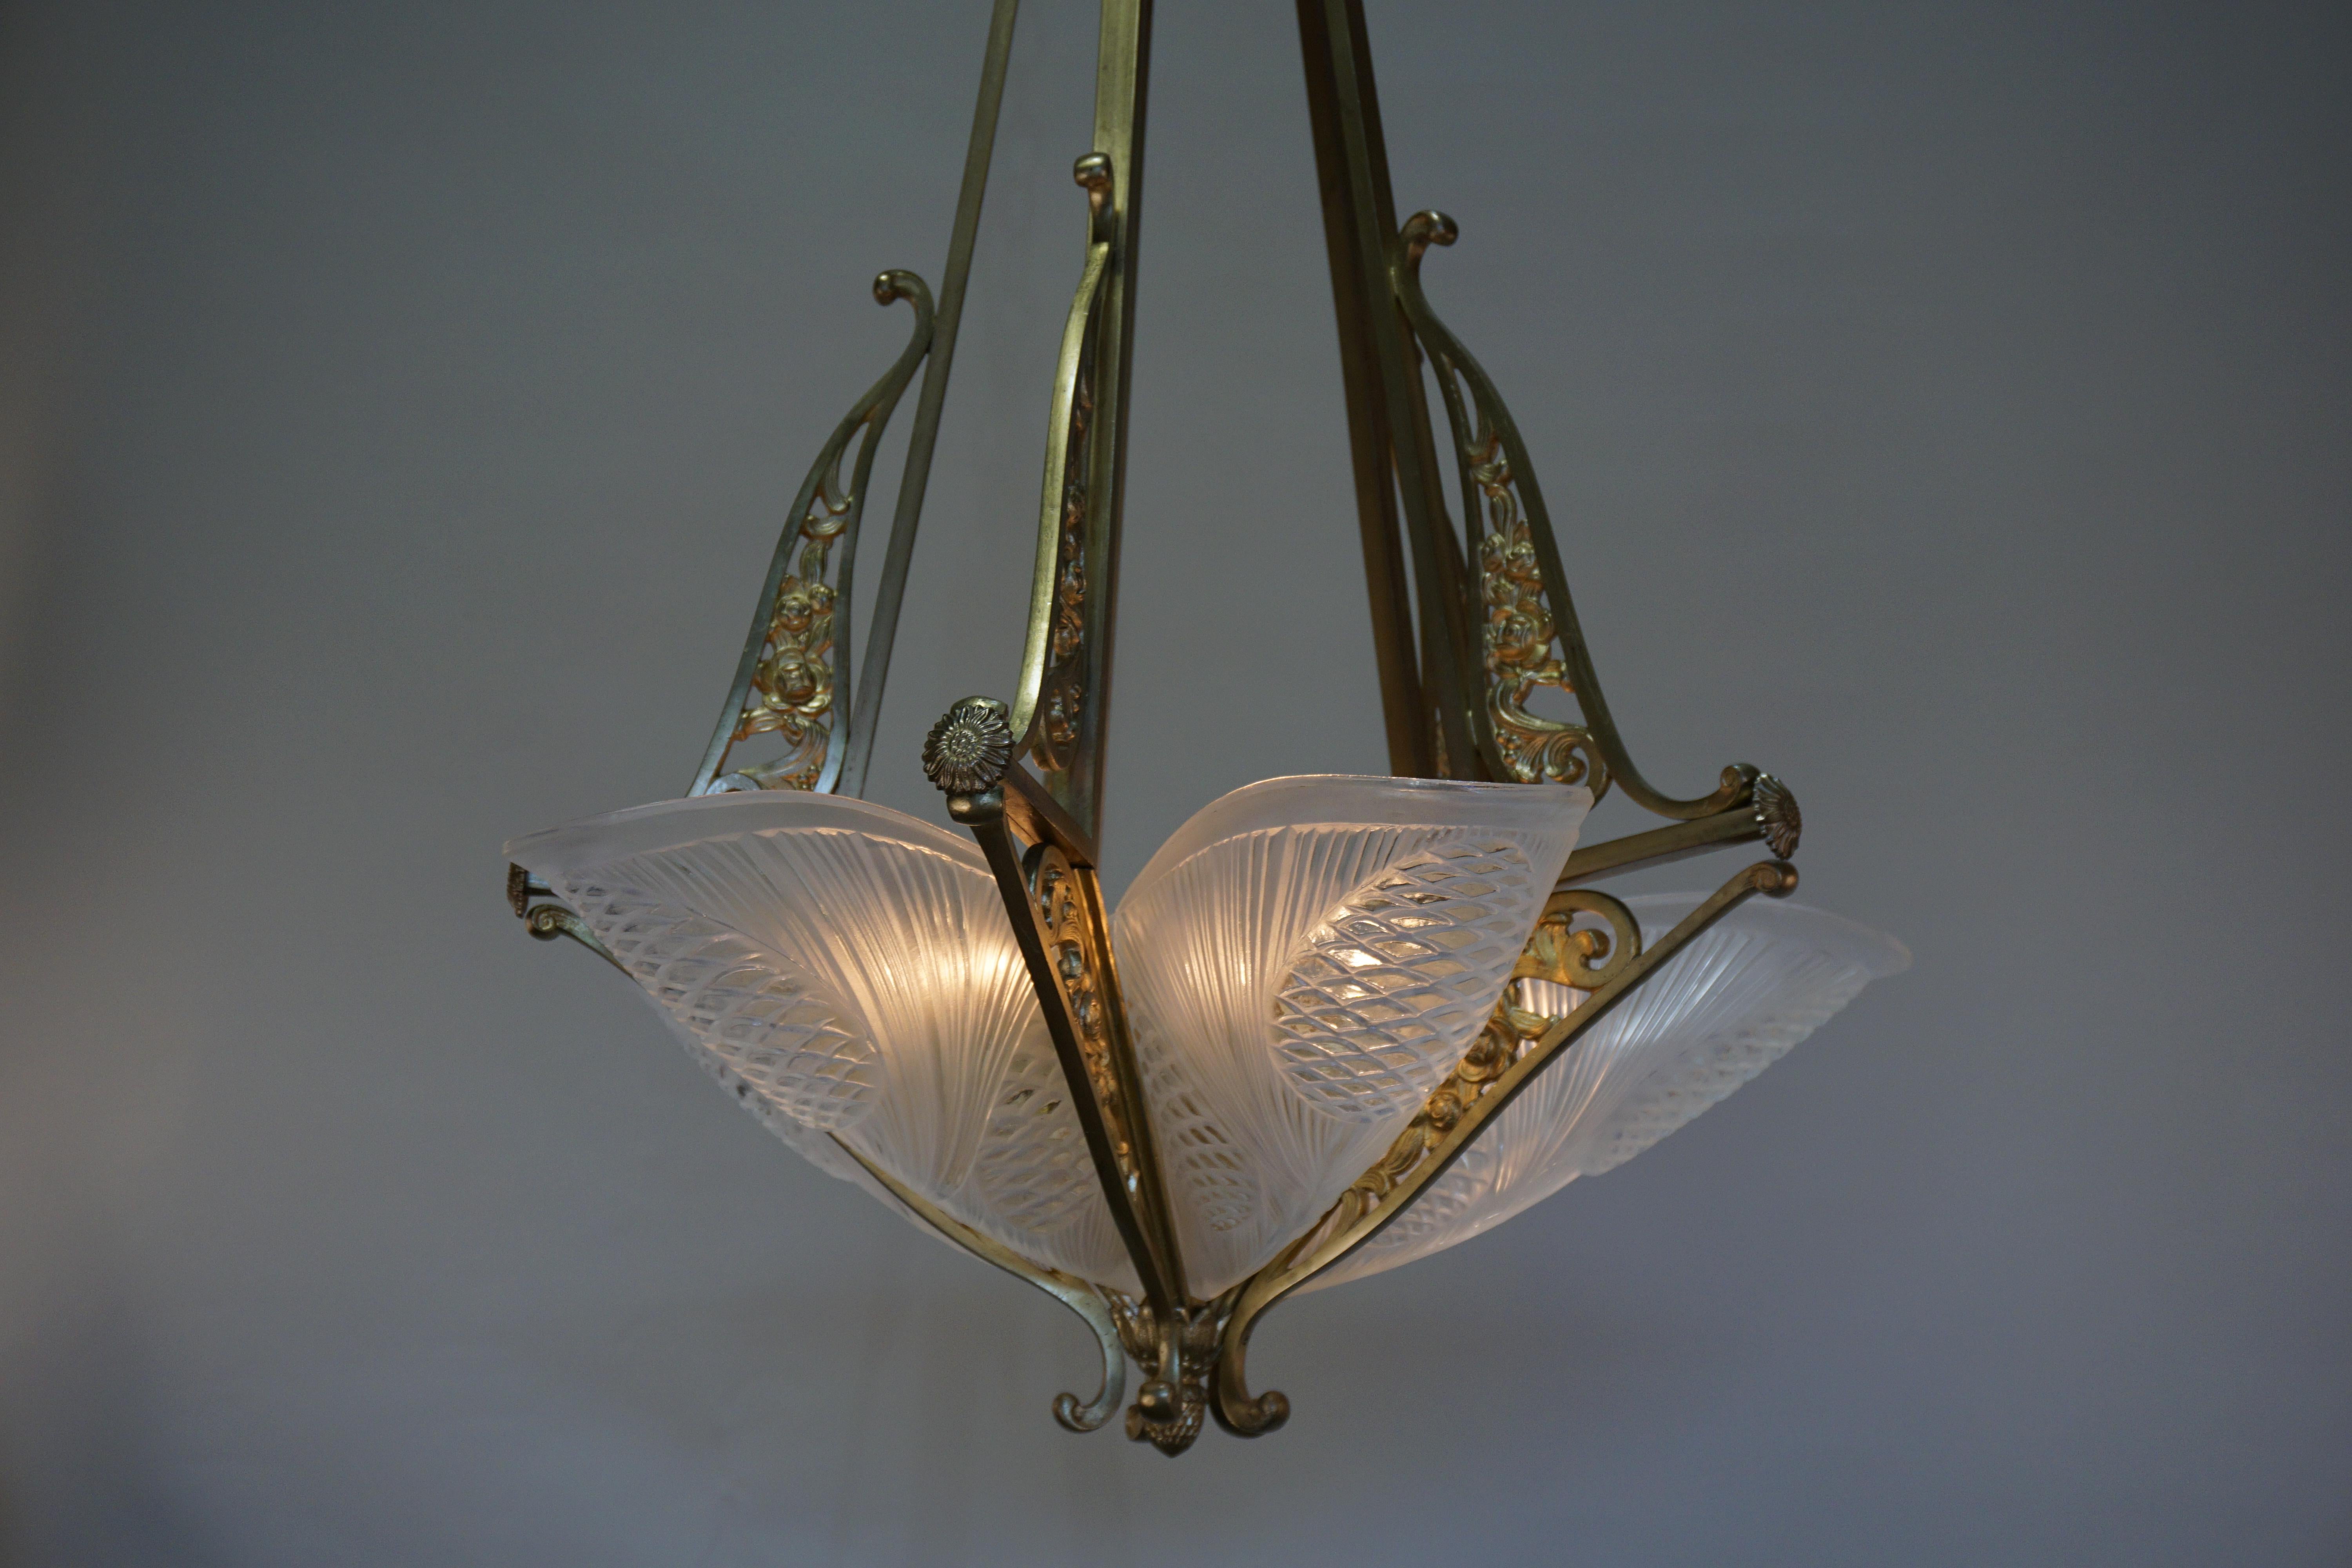 French 1920s five-glass shade with bronze frame French Art Deco chandelier.
Ten lights 60 watt max each.